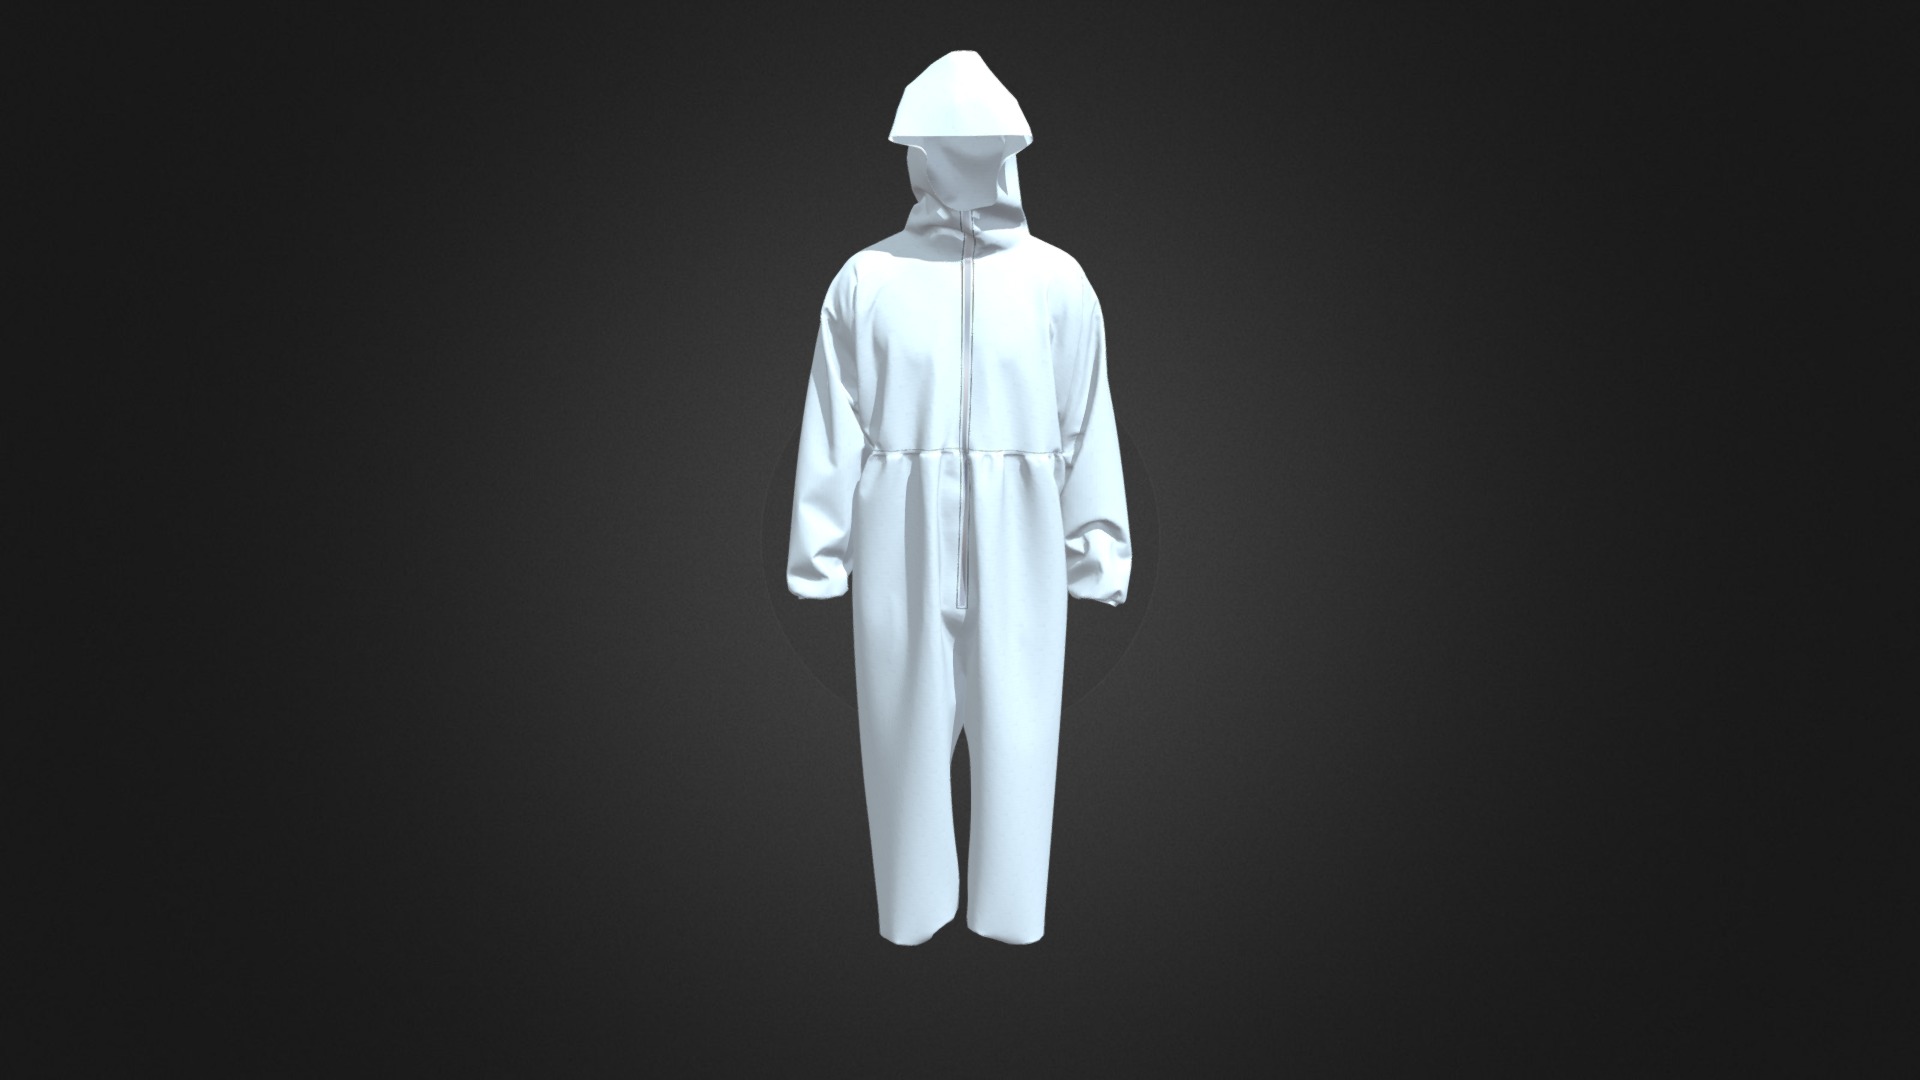 3D model Dustproof Clothing - This is a 3D model of the Dustproof Clothing. The 3D model is about a mannequin wearing a white suit.